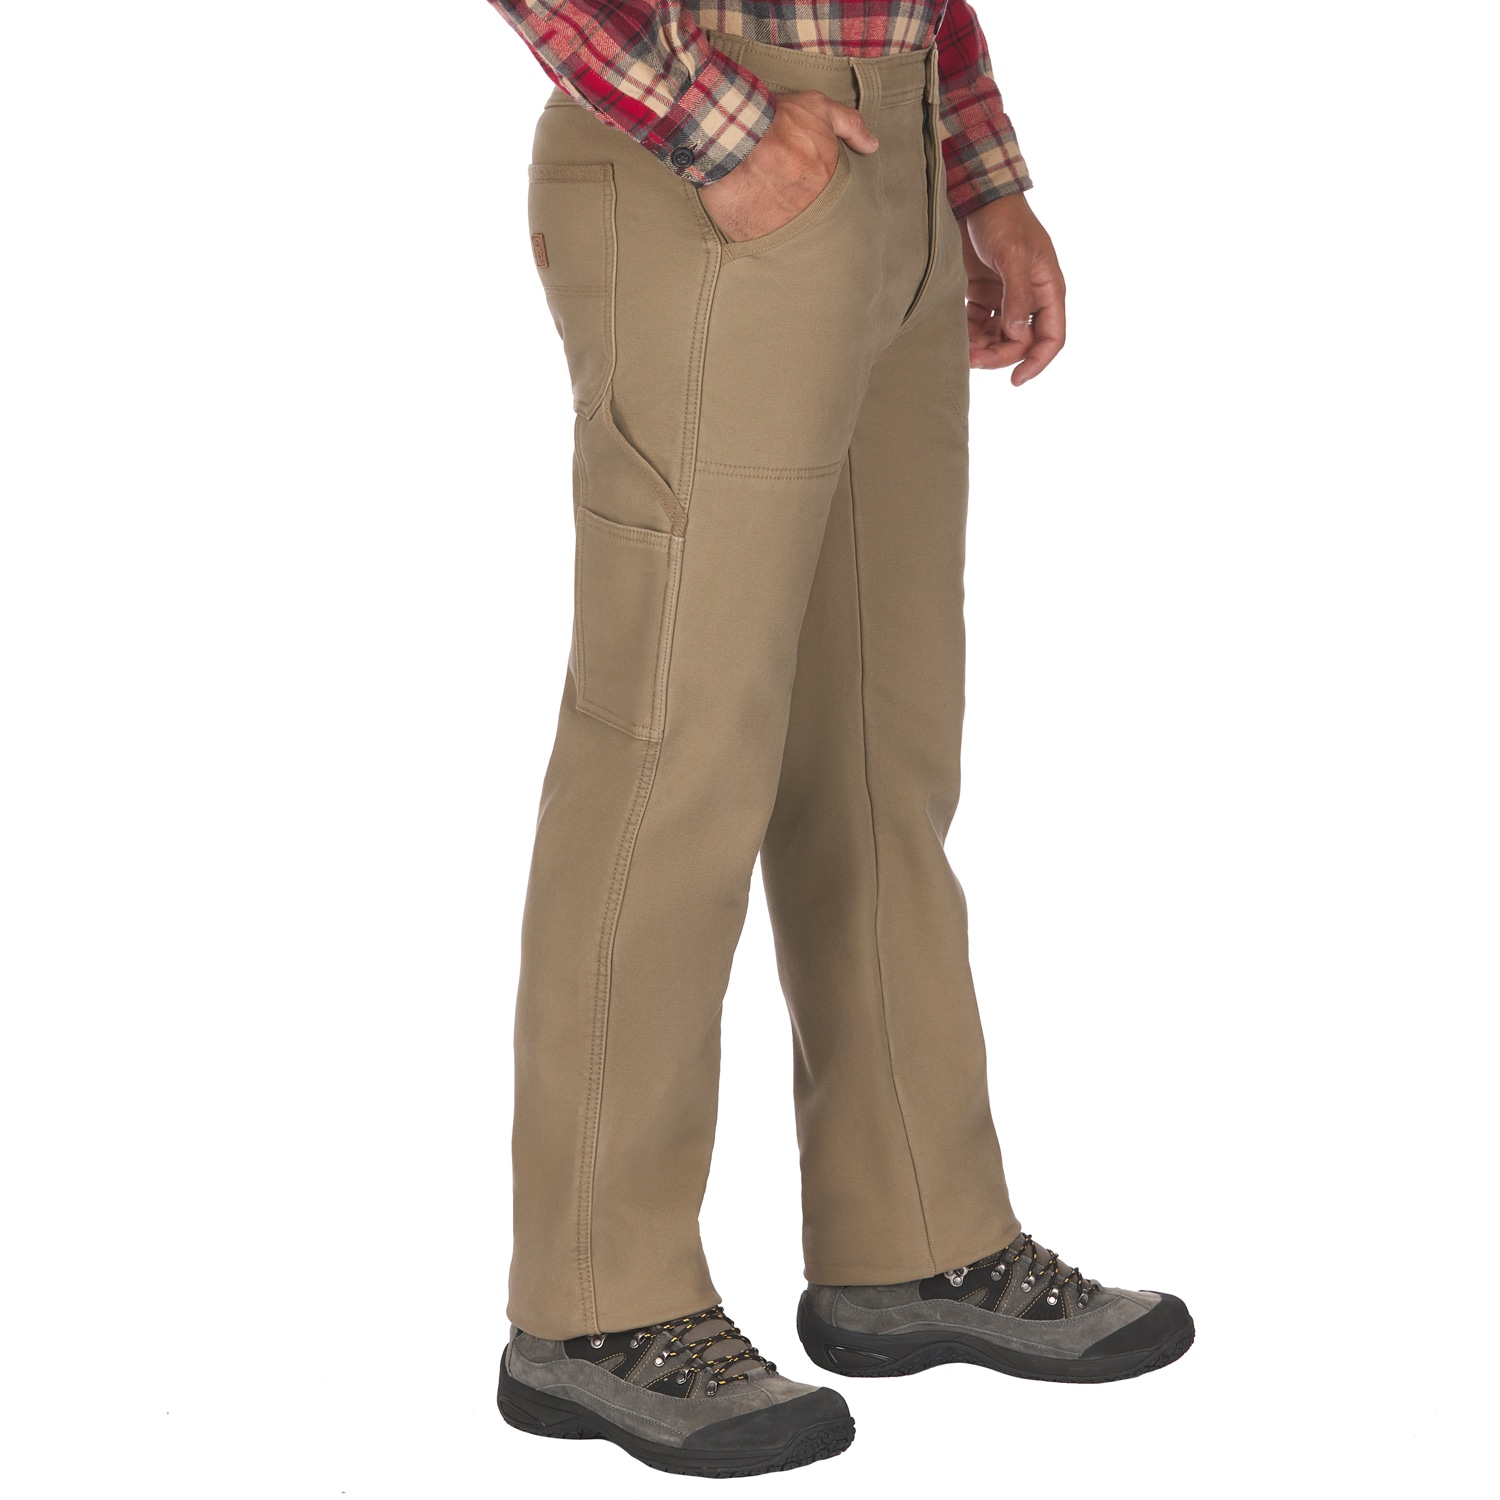 Coleman Work Pants at Lowes.com